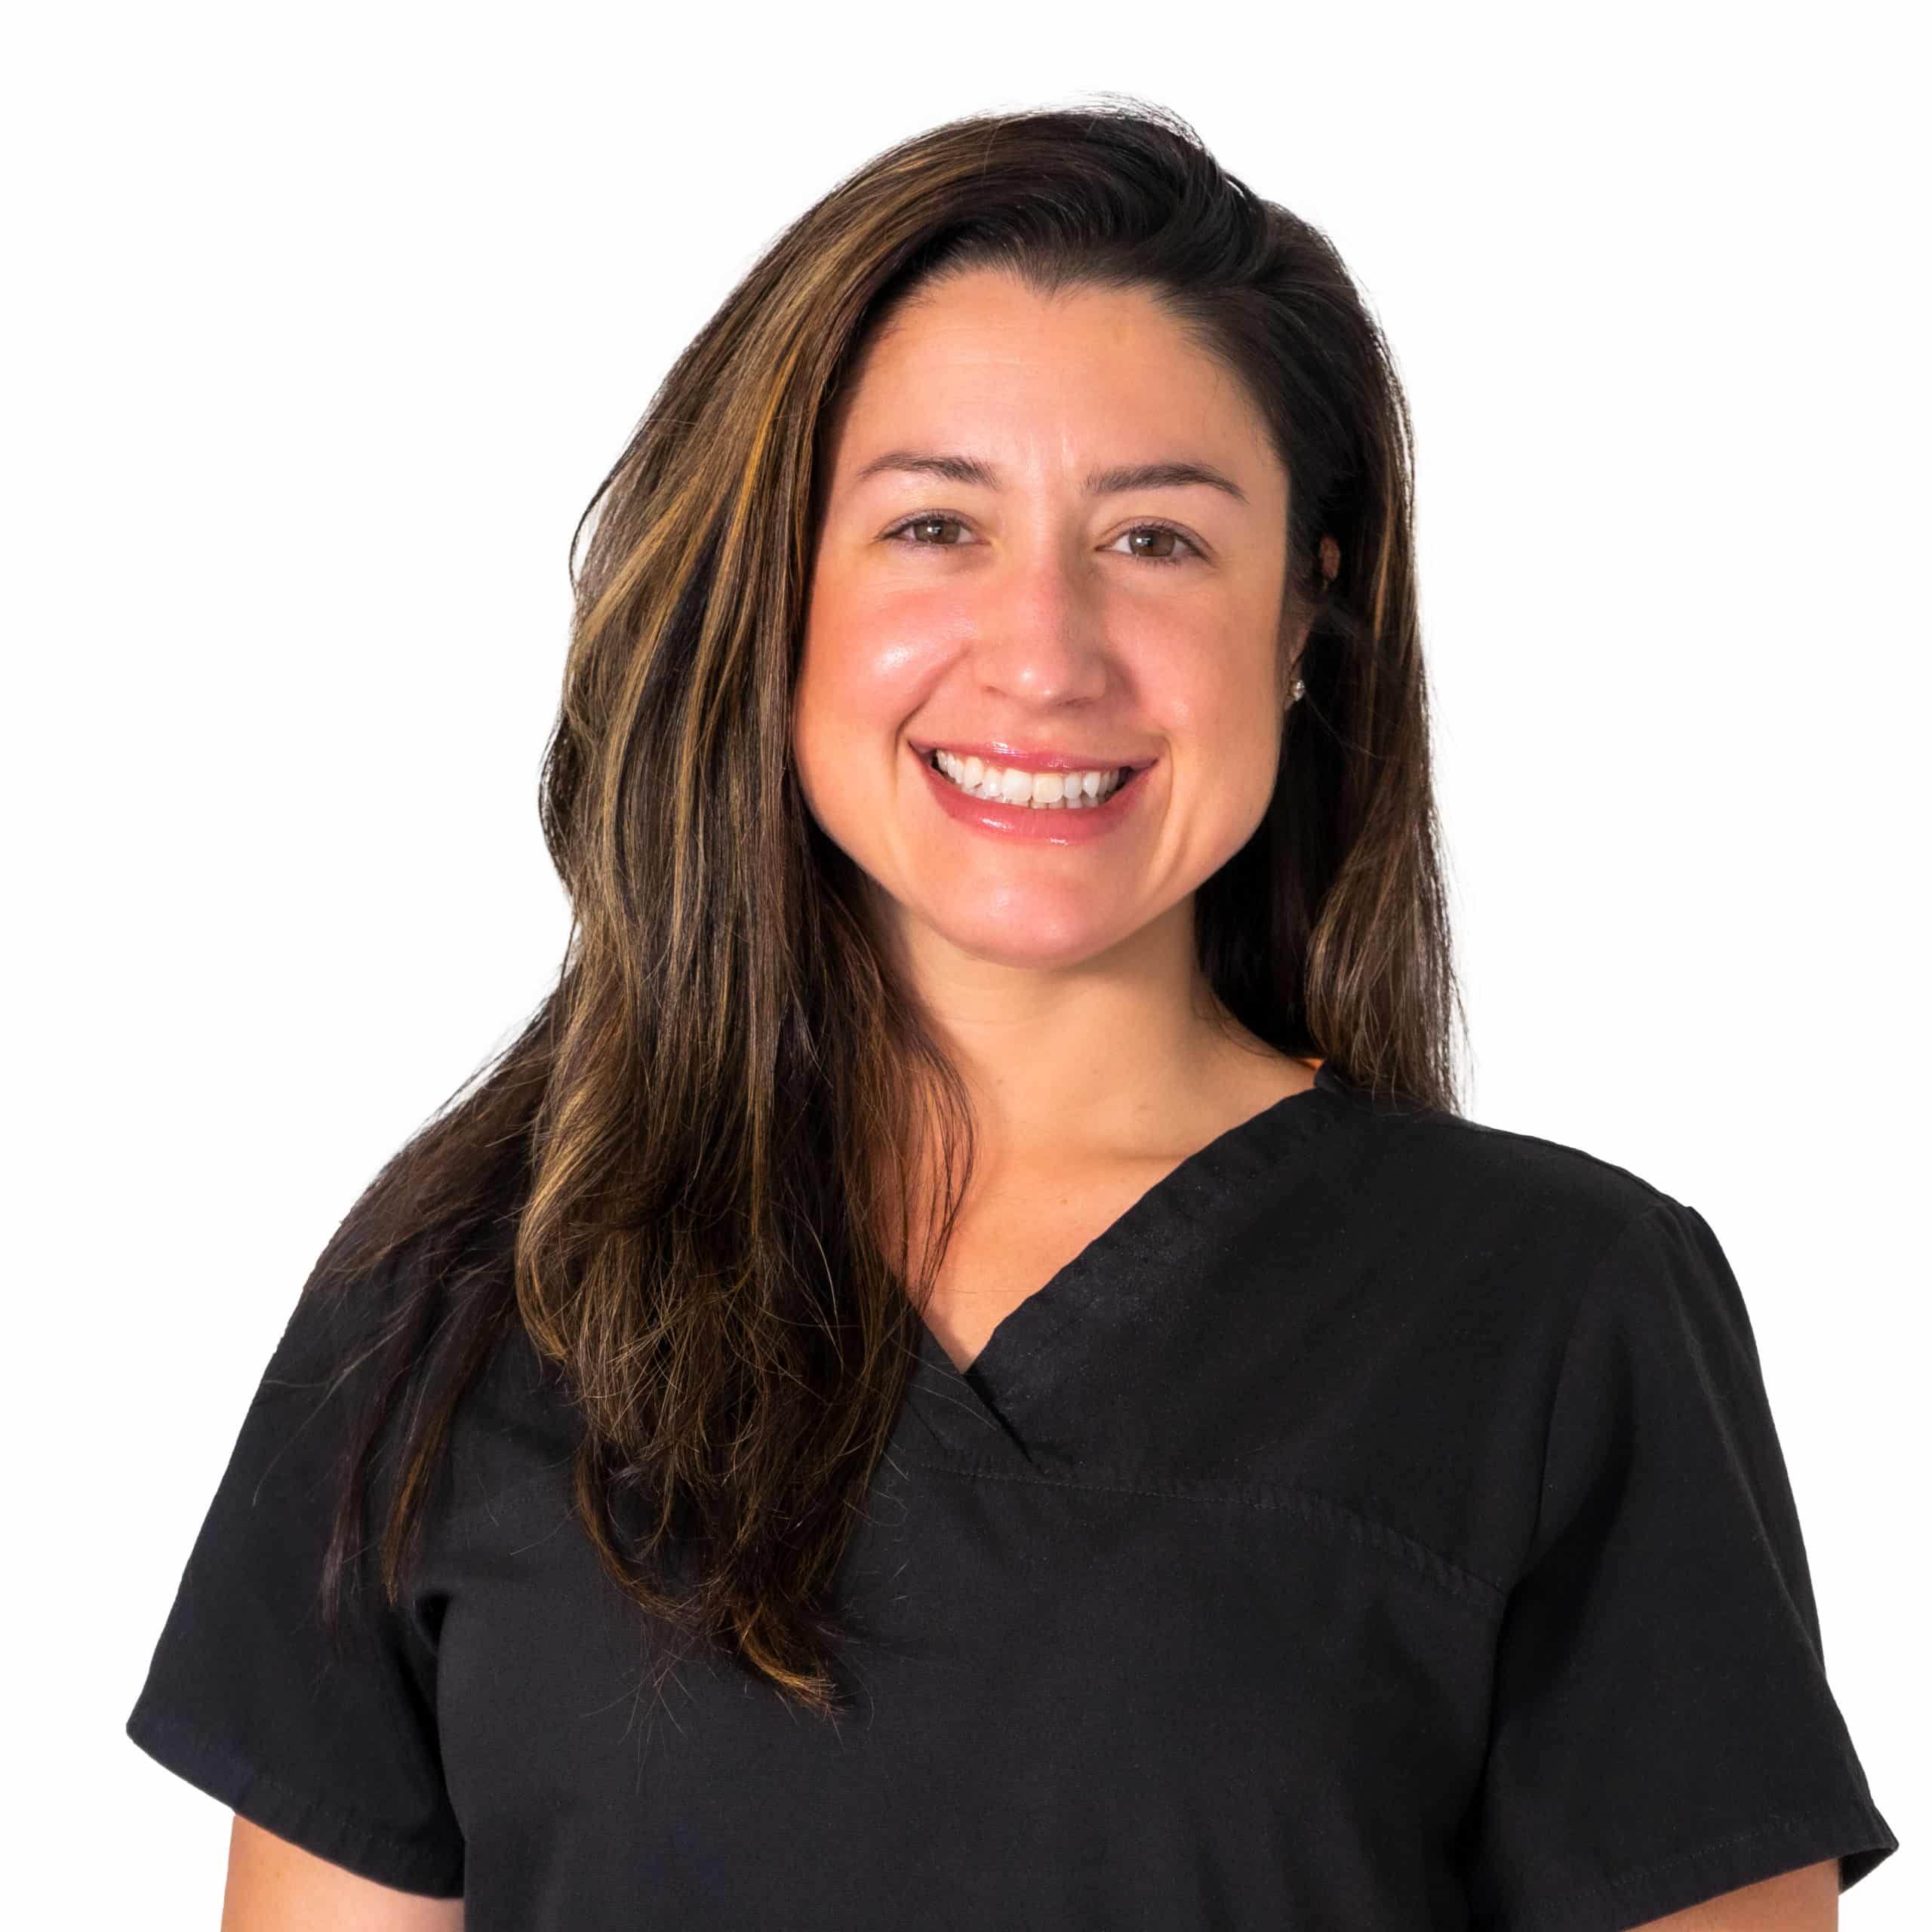 Sarah Cellucci, Surgical Tech at Regeneris Medspa, smiles for the camera in scrubs